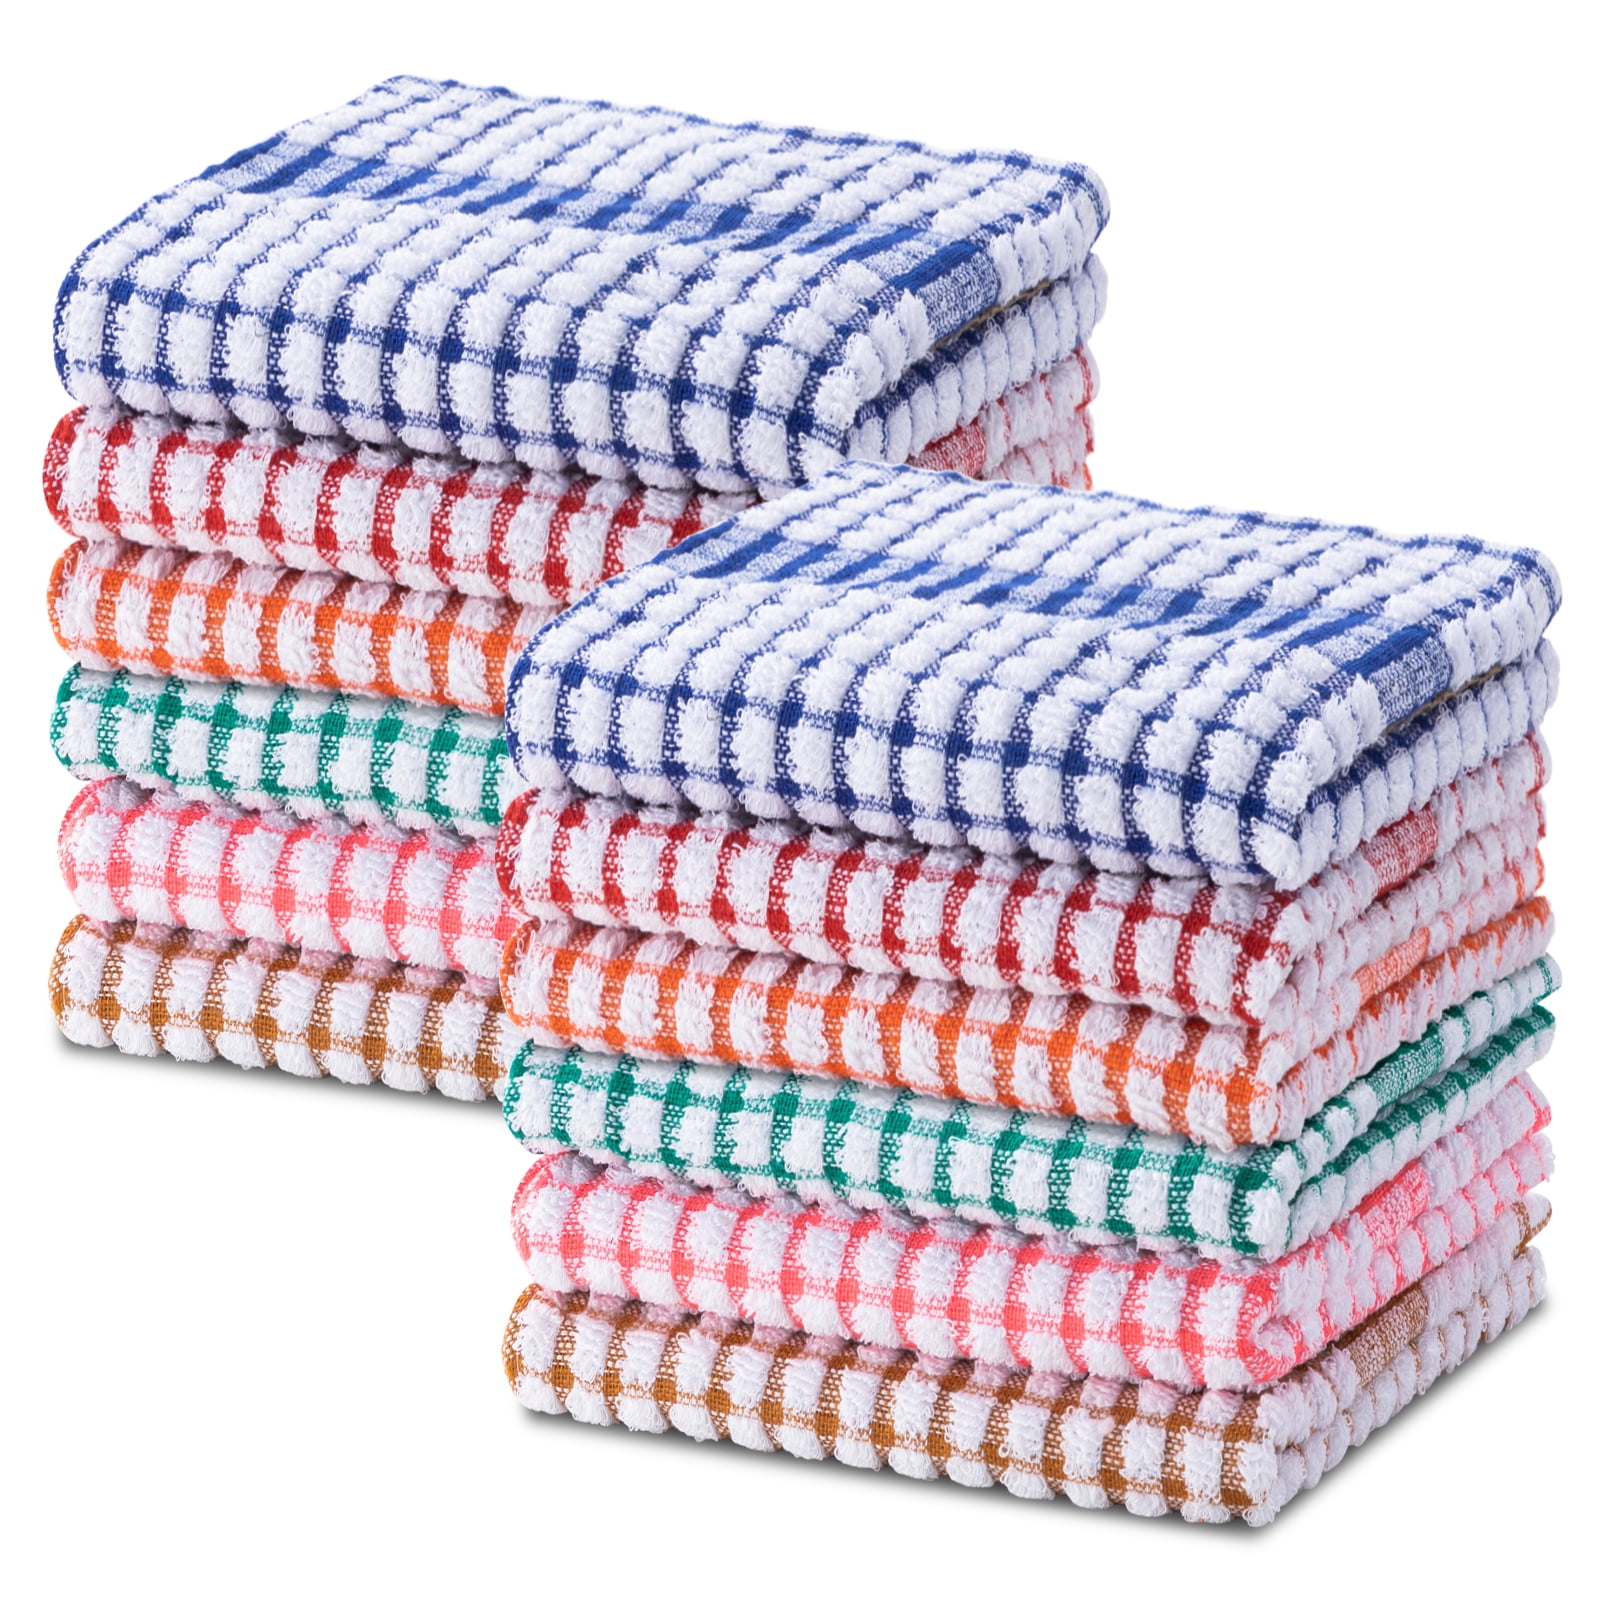 Kitchen Dish Towels, 16 Inch x 25 Inch Bulk Cotton Kitchen Towels and  Dishcloths Set, 12 Pack Dish Cloths for Washing Dishes Dish Rags for Drying